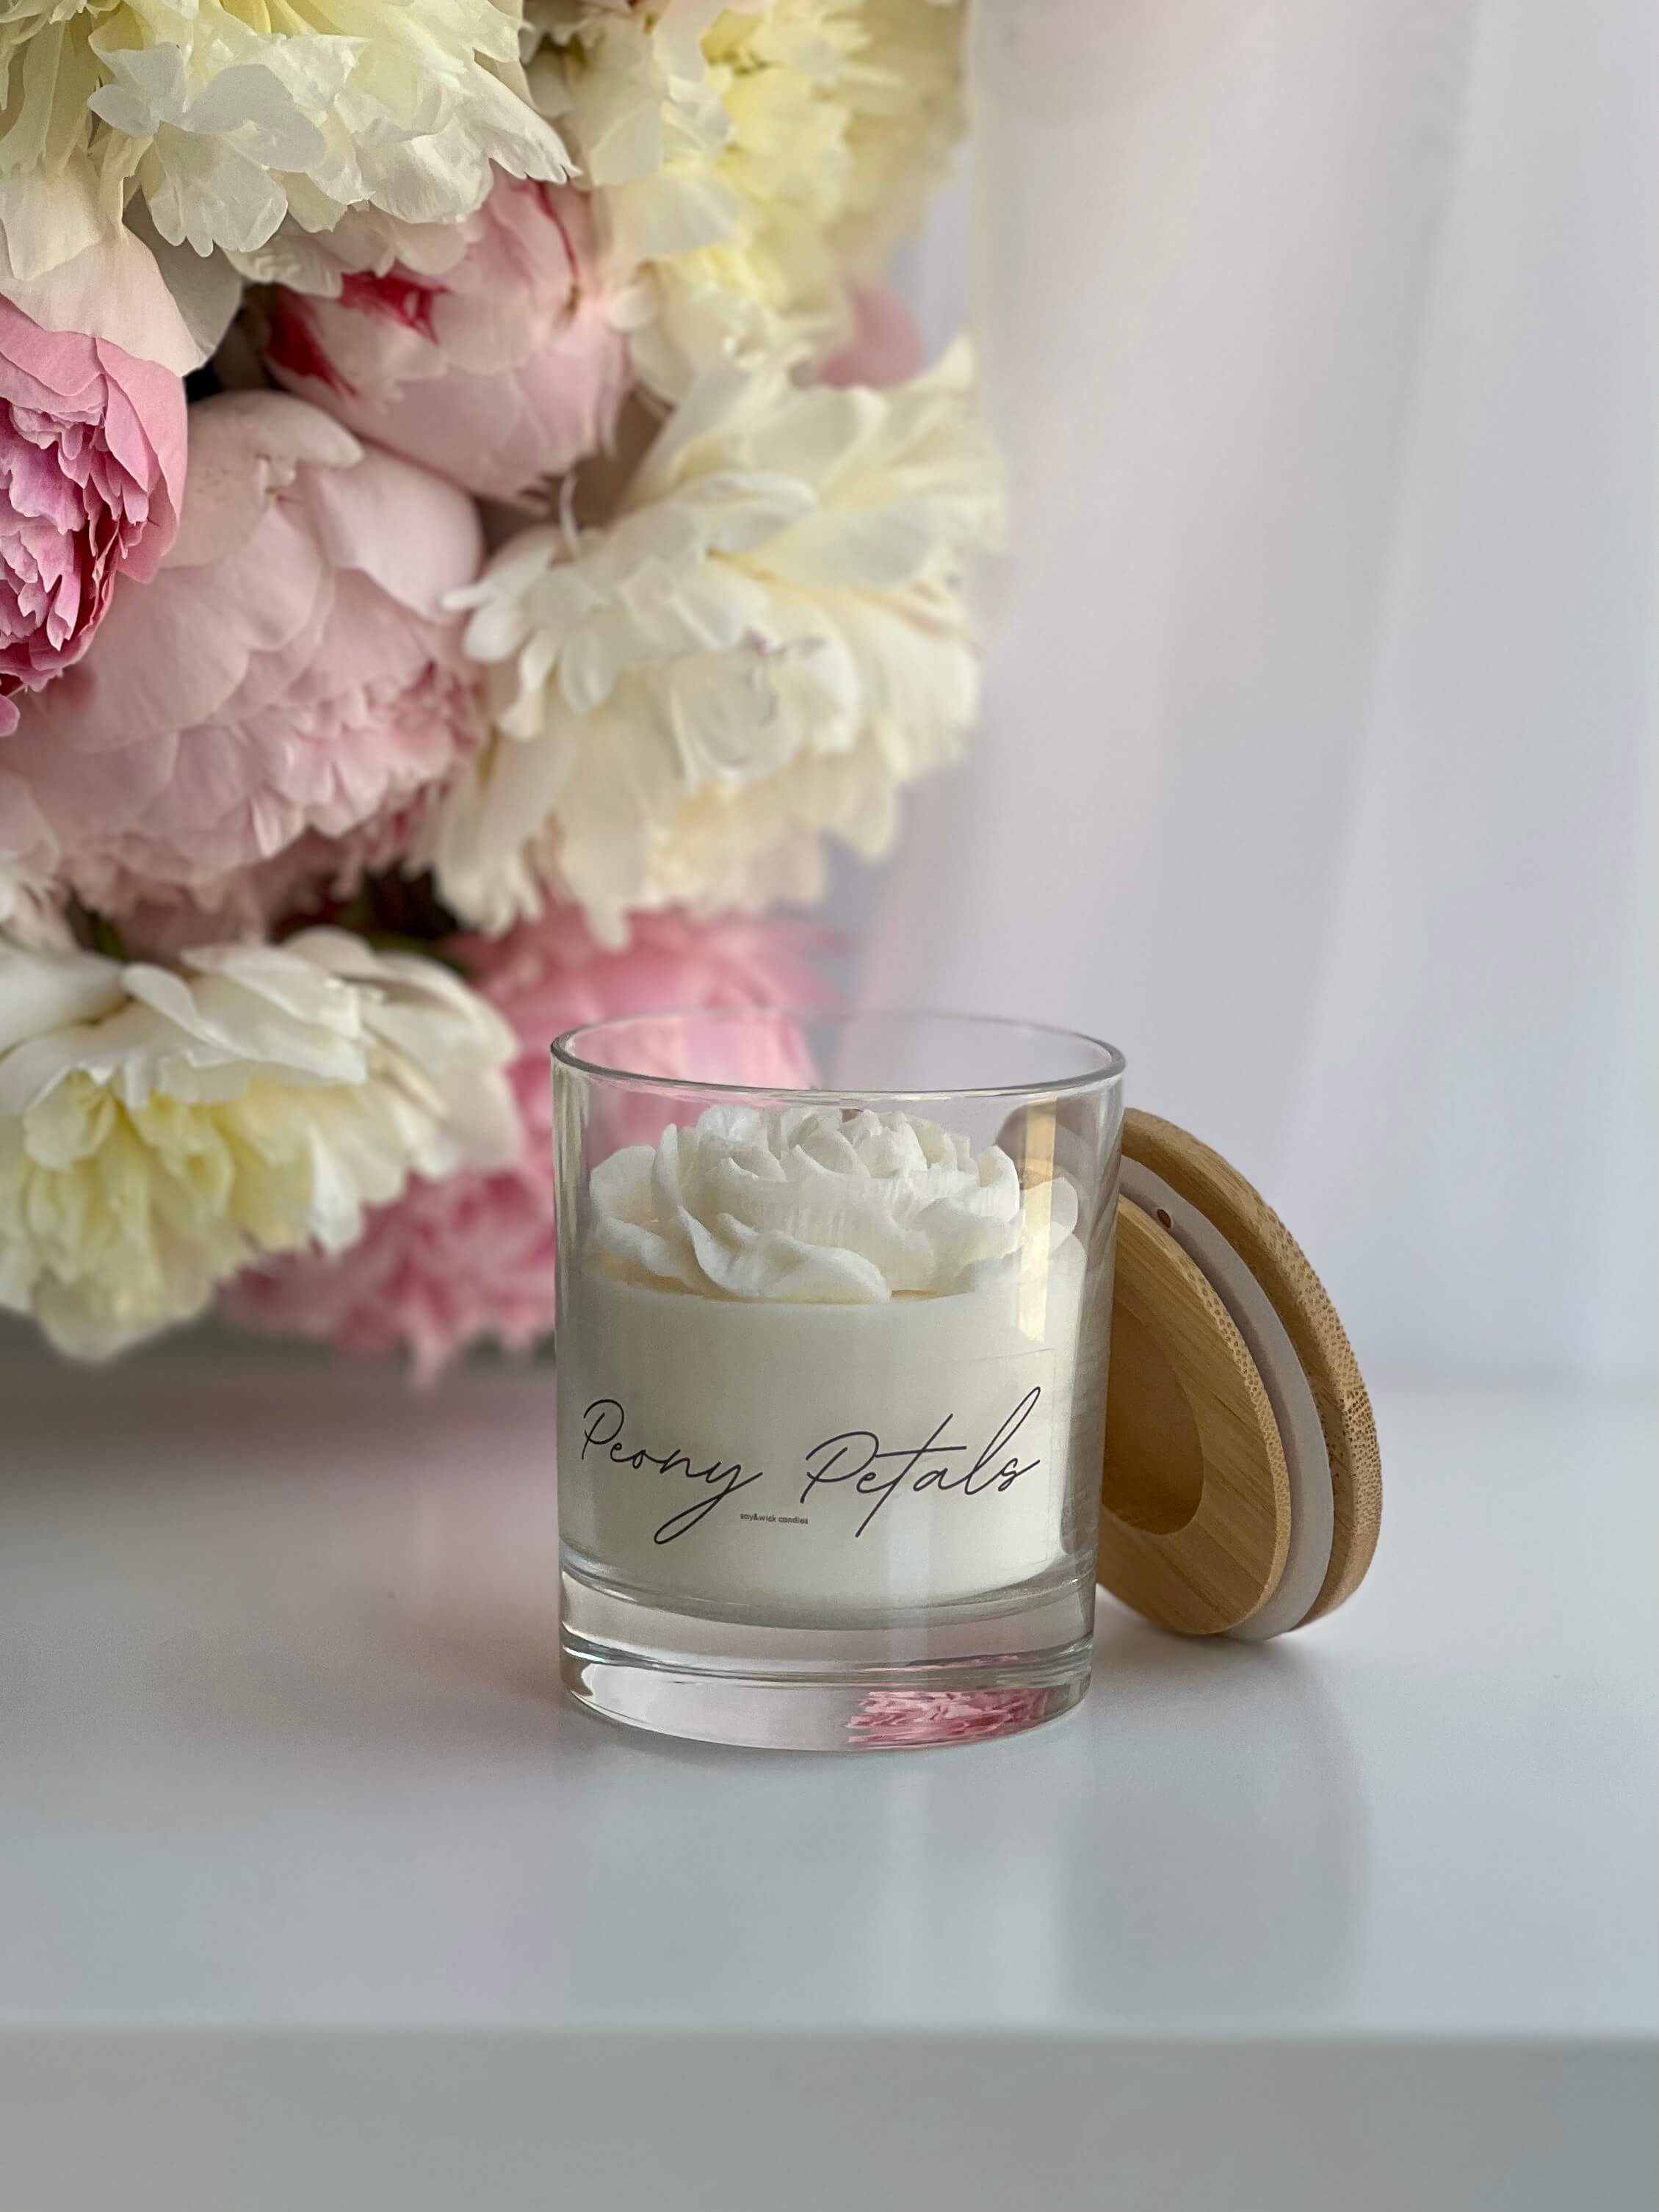 Shop Floral Candle Online at Soy & Wick Candle Studio